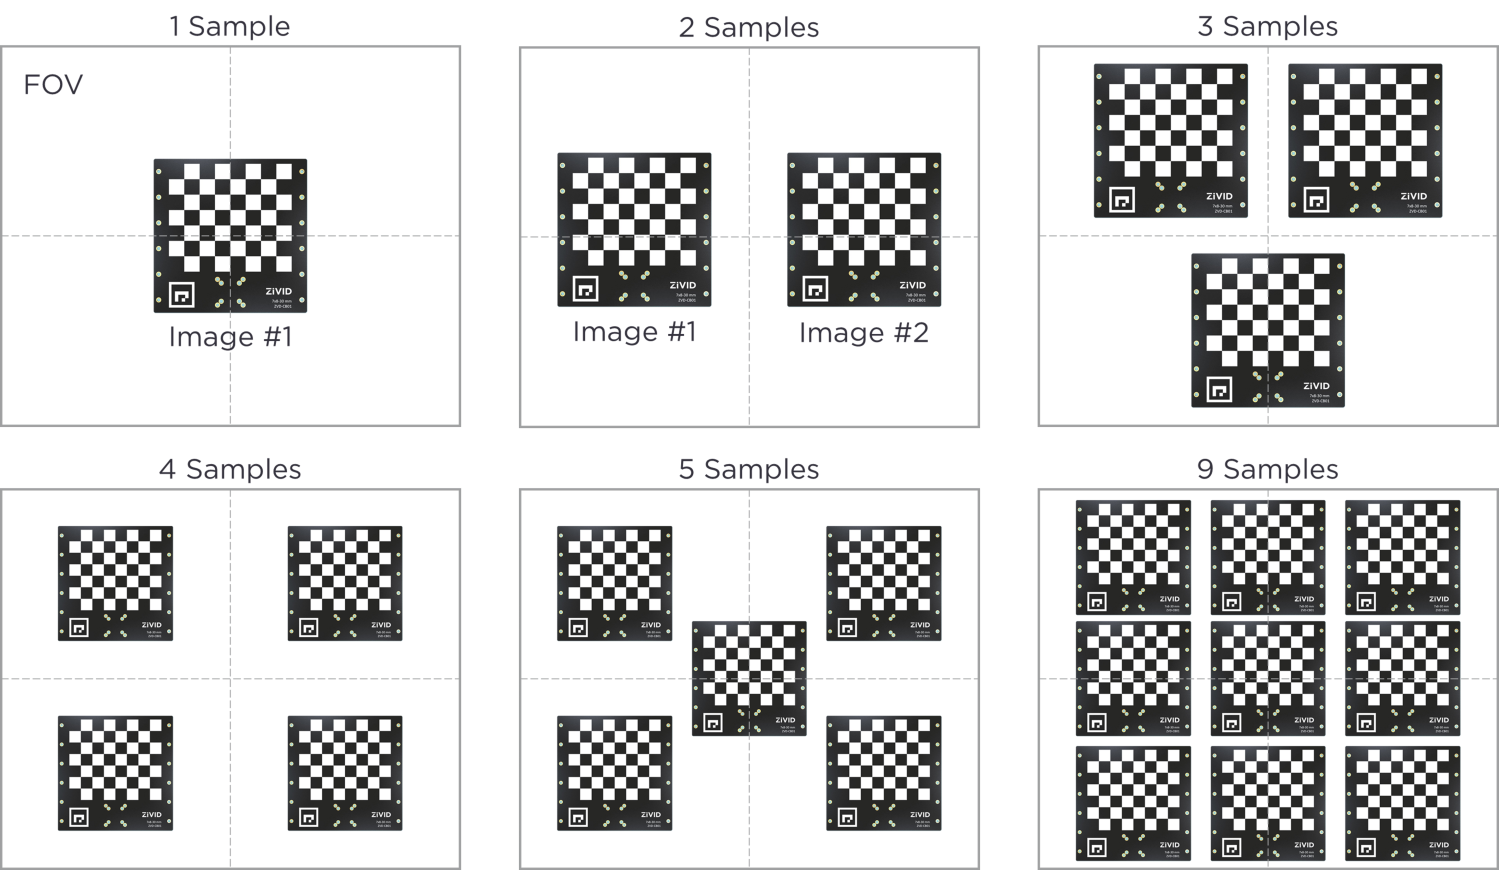 Nine different images which shows how calibration boards can cover larger field-of-views.